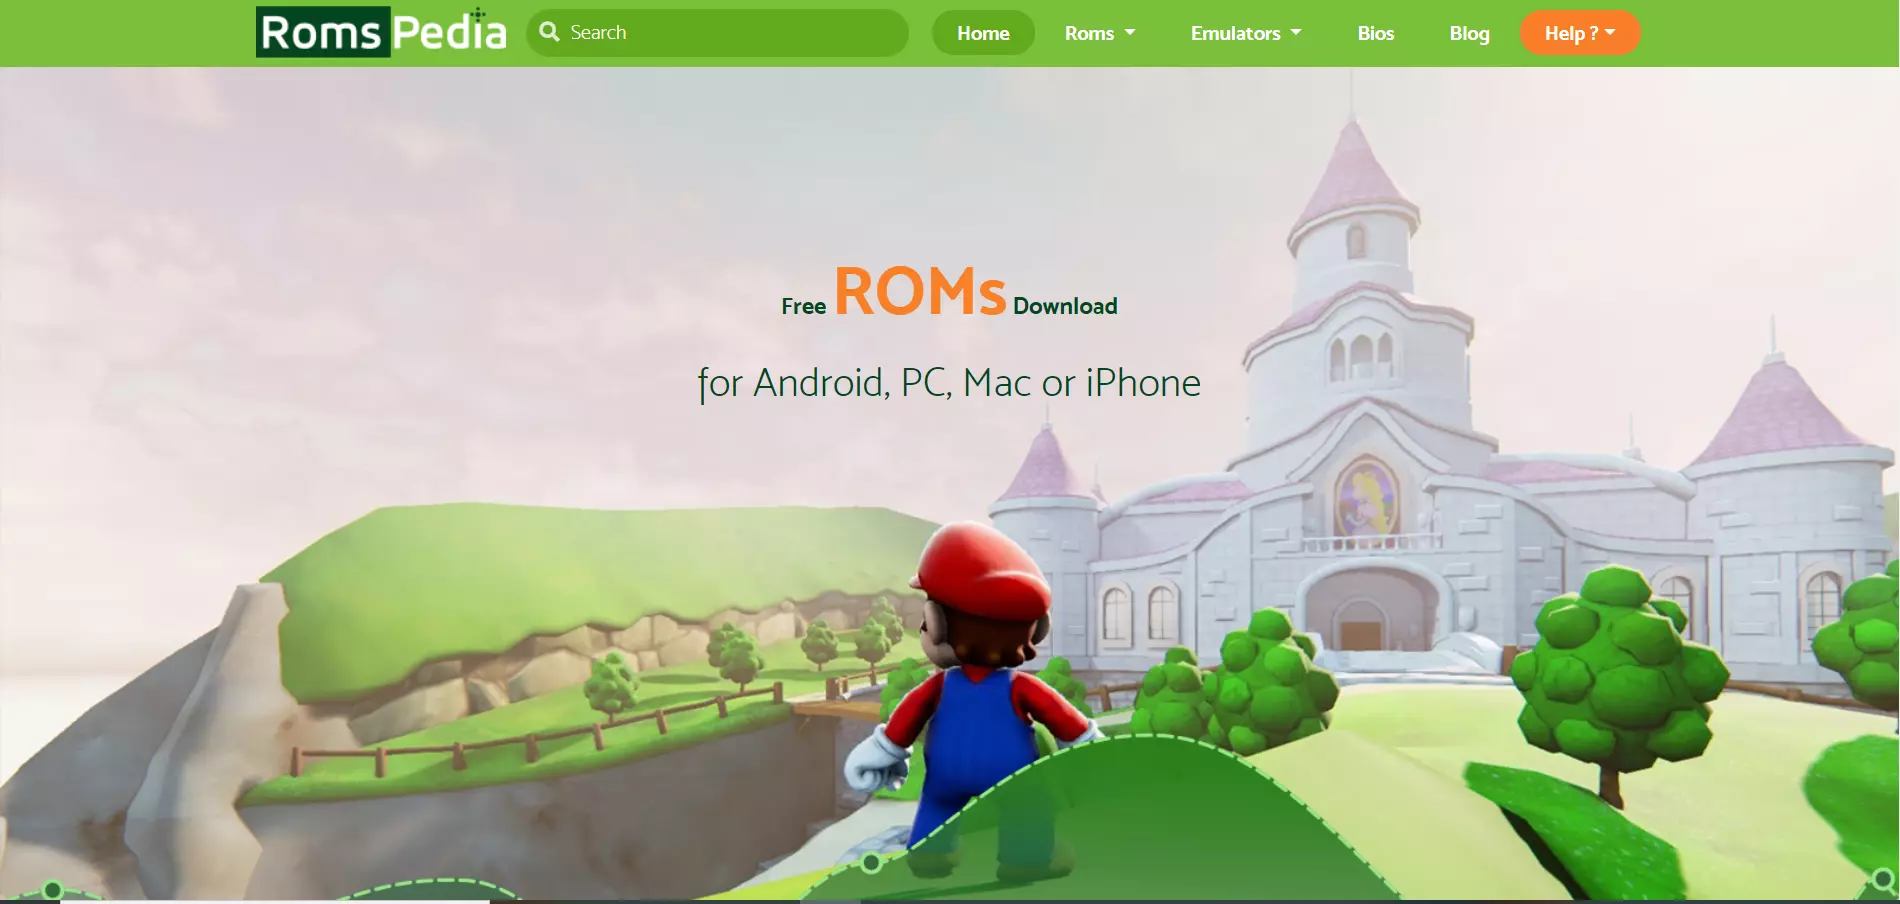 ROMSPEDIA website with Free Games for PC